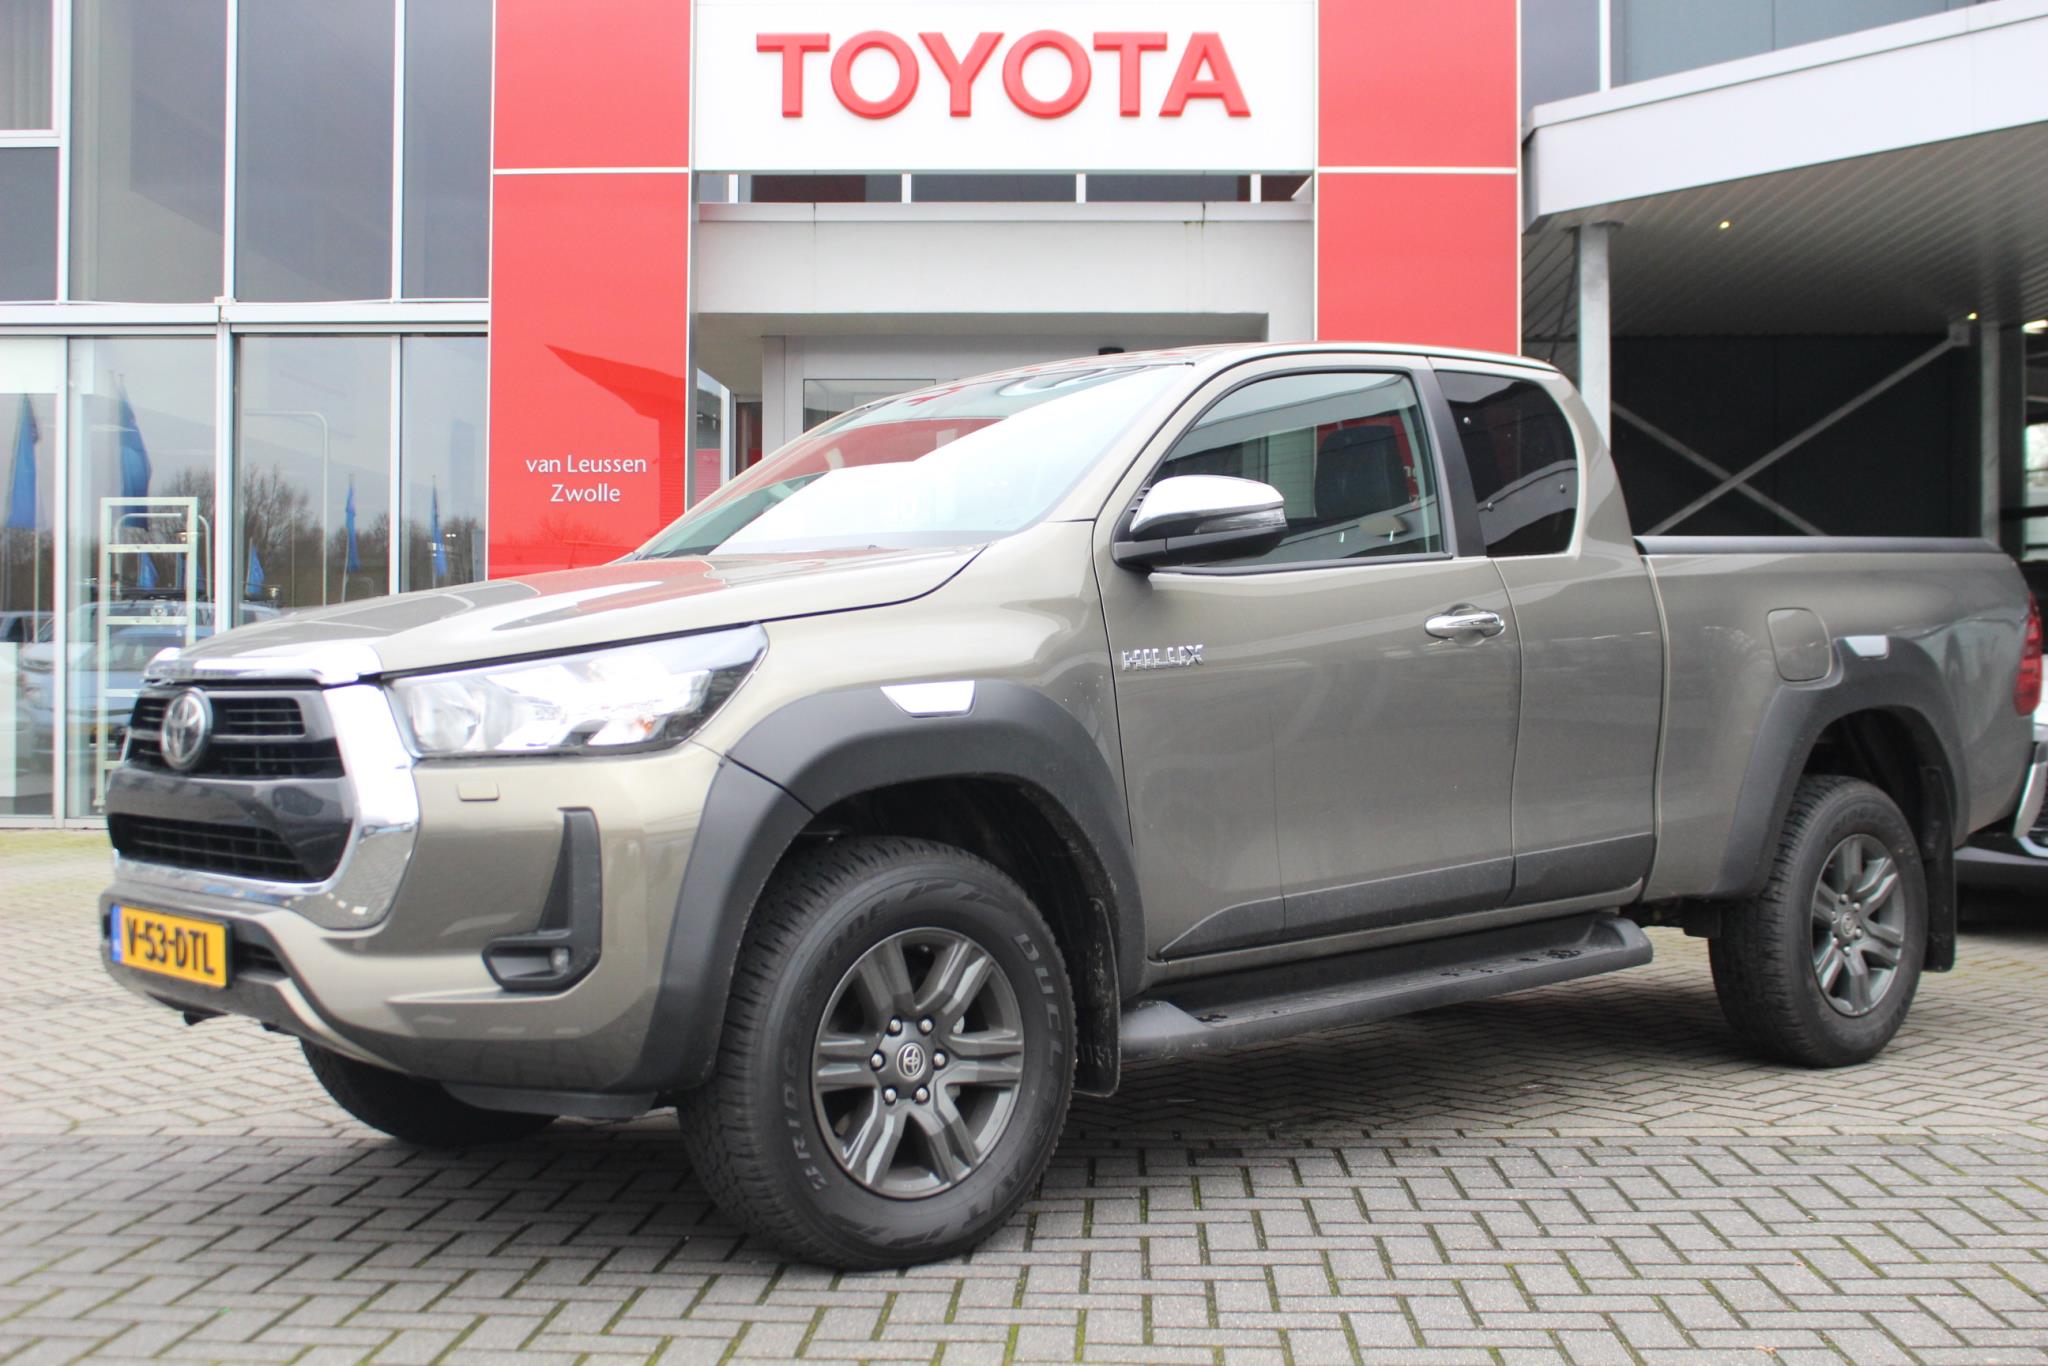 Toyota Hilux 2.4 D-4D Xtra Cab PROFESSIONAL CHALLENGER PAKKET TREKHAAK LEER STOELVERW ROLLBAR TONEAU COVER APPLE/ANDROID CAMERA CLIMA AD-CRUISE